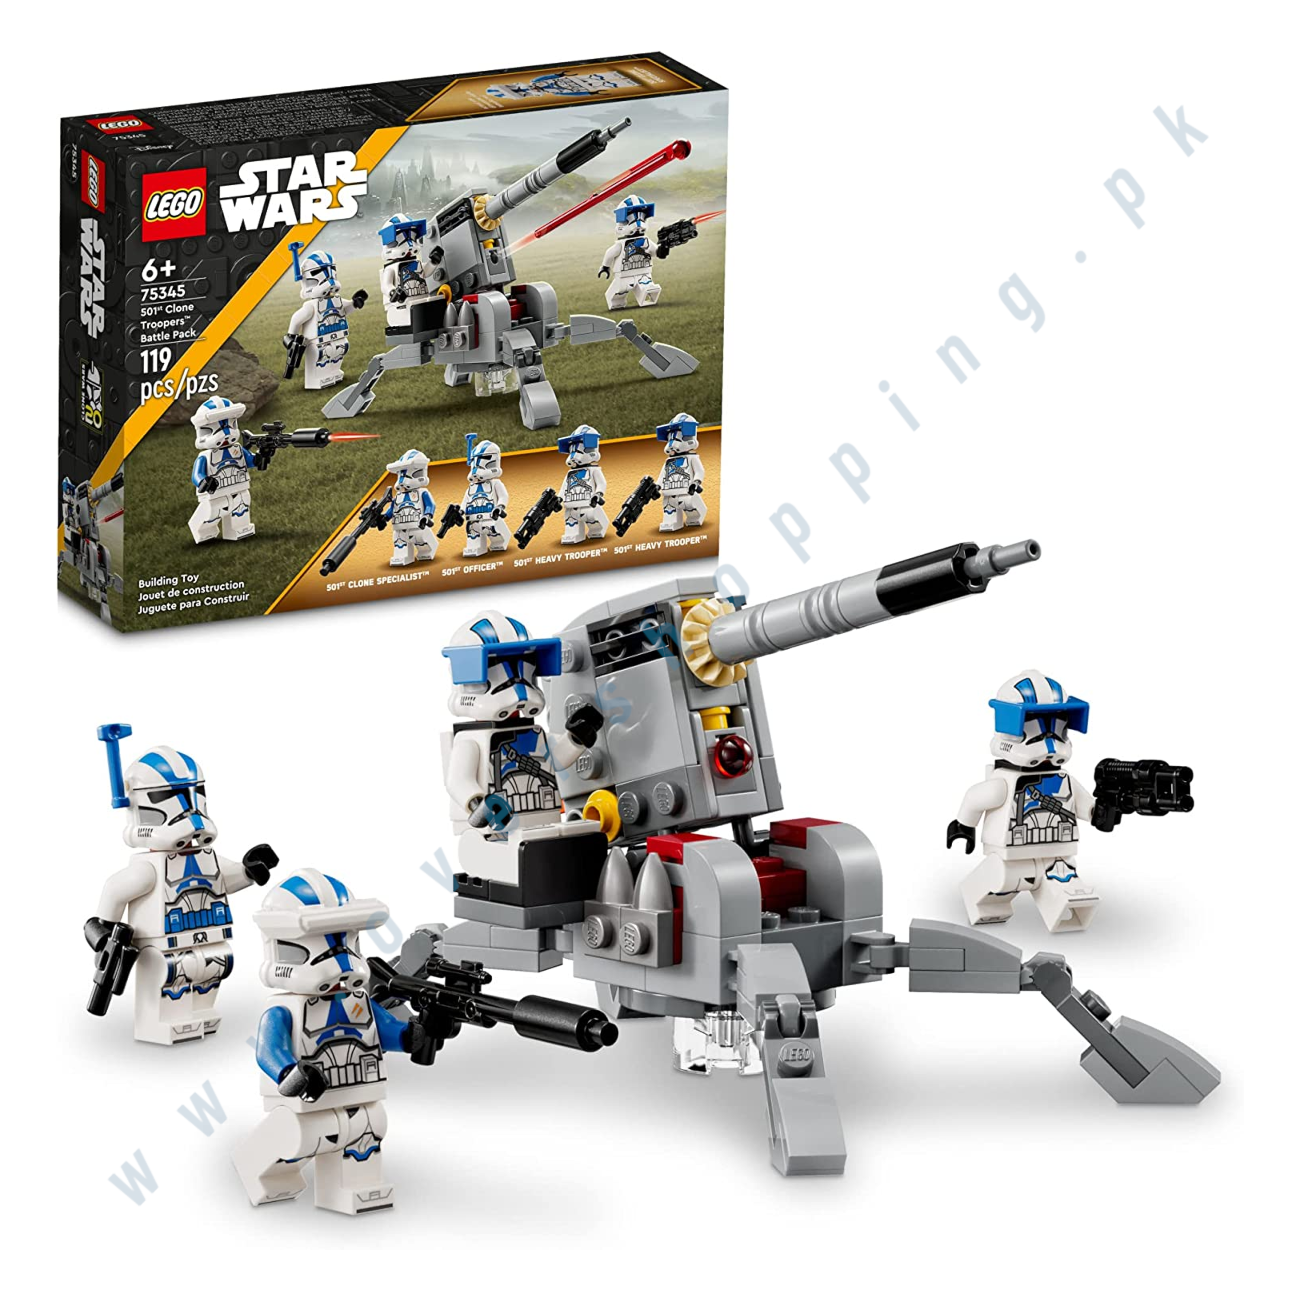 LEGO Star Wars 501st Clone Troopers Battle Pack 75345, Buildable Toy Set